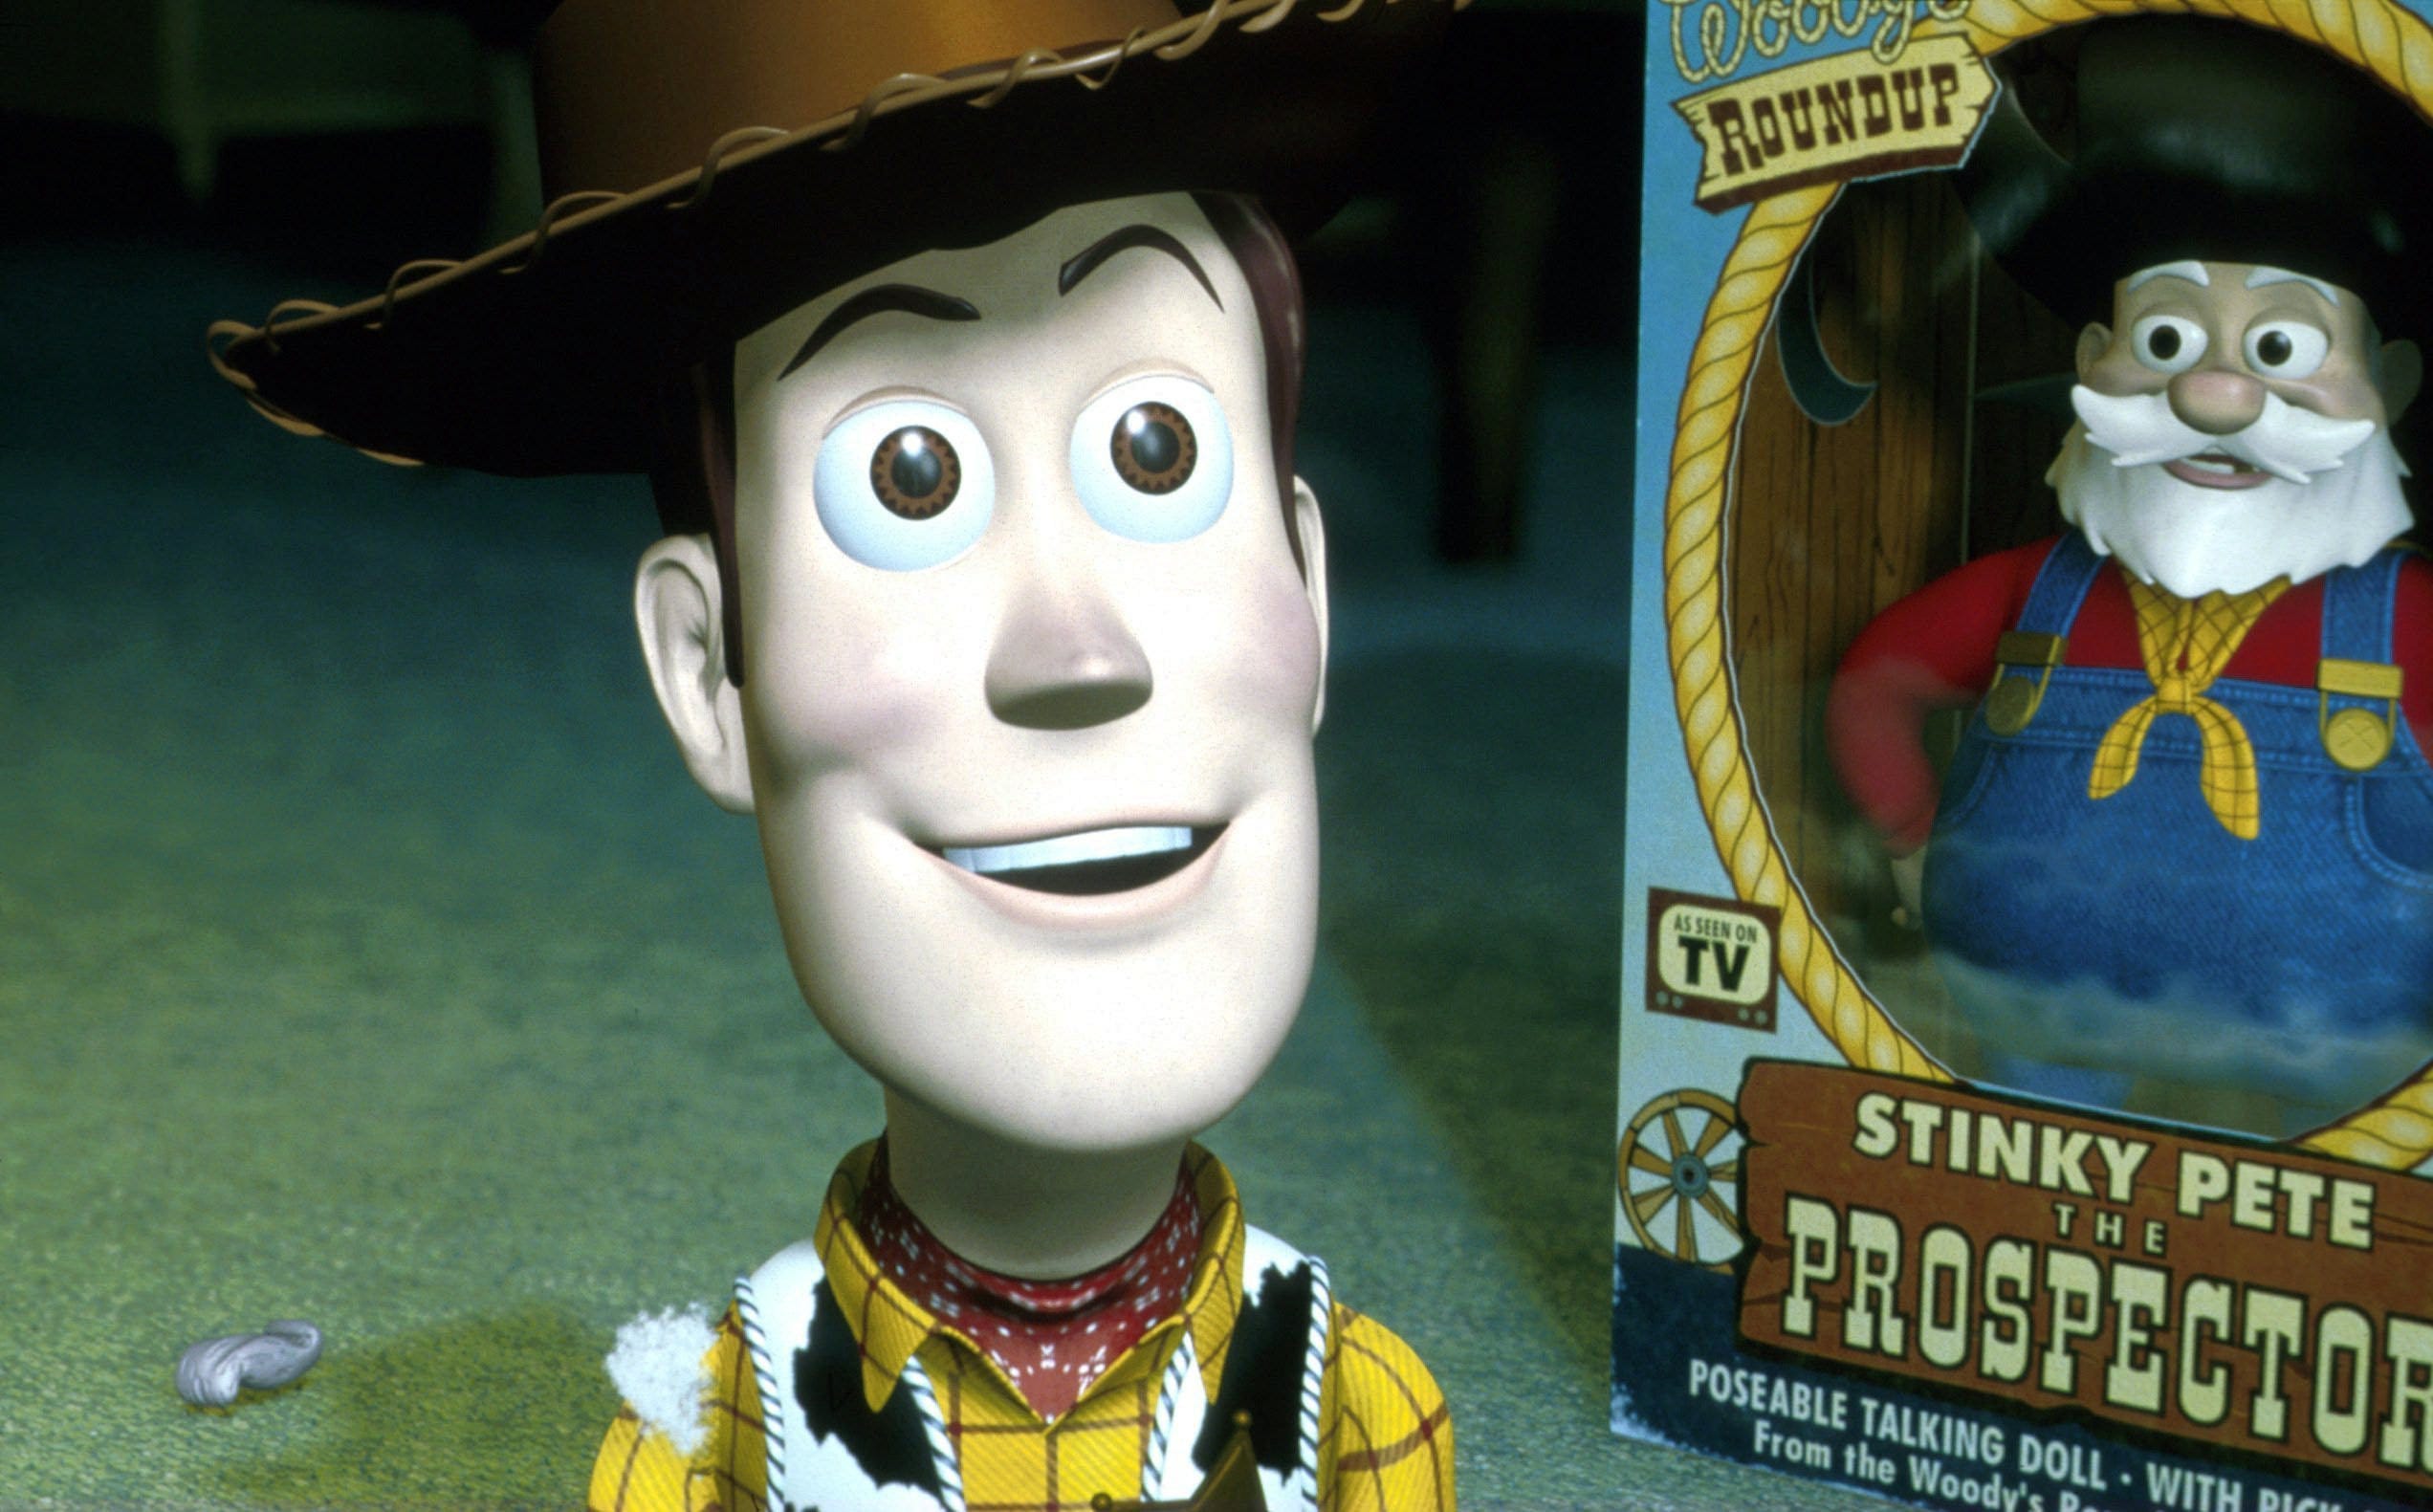 toy story 2 box office